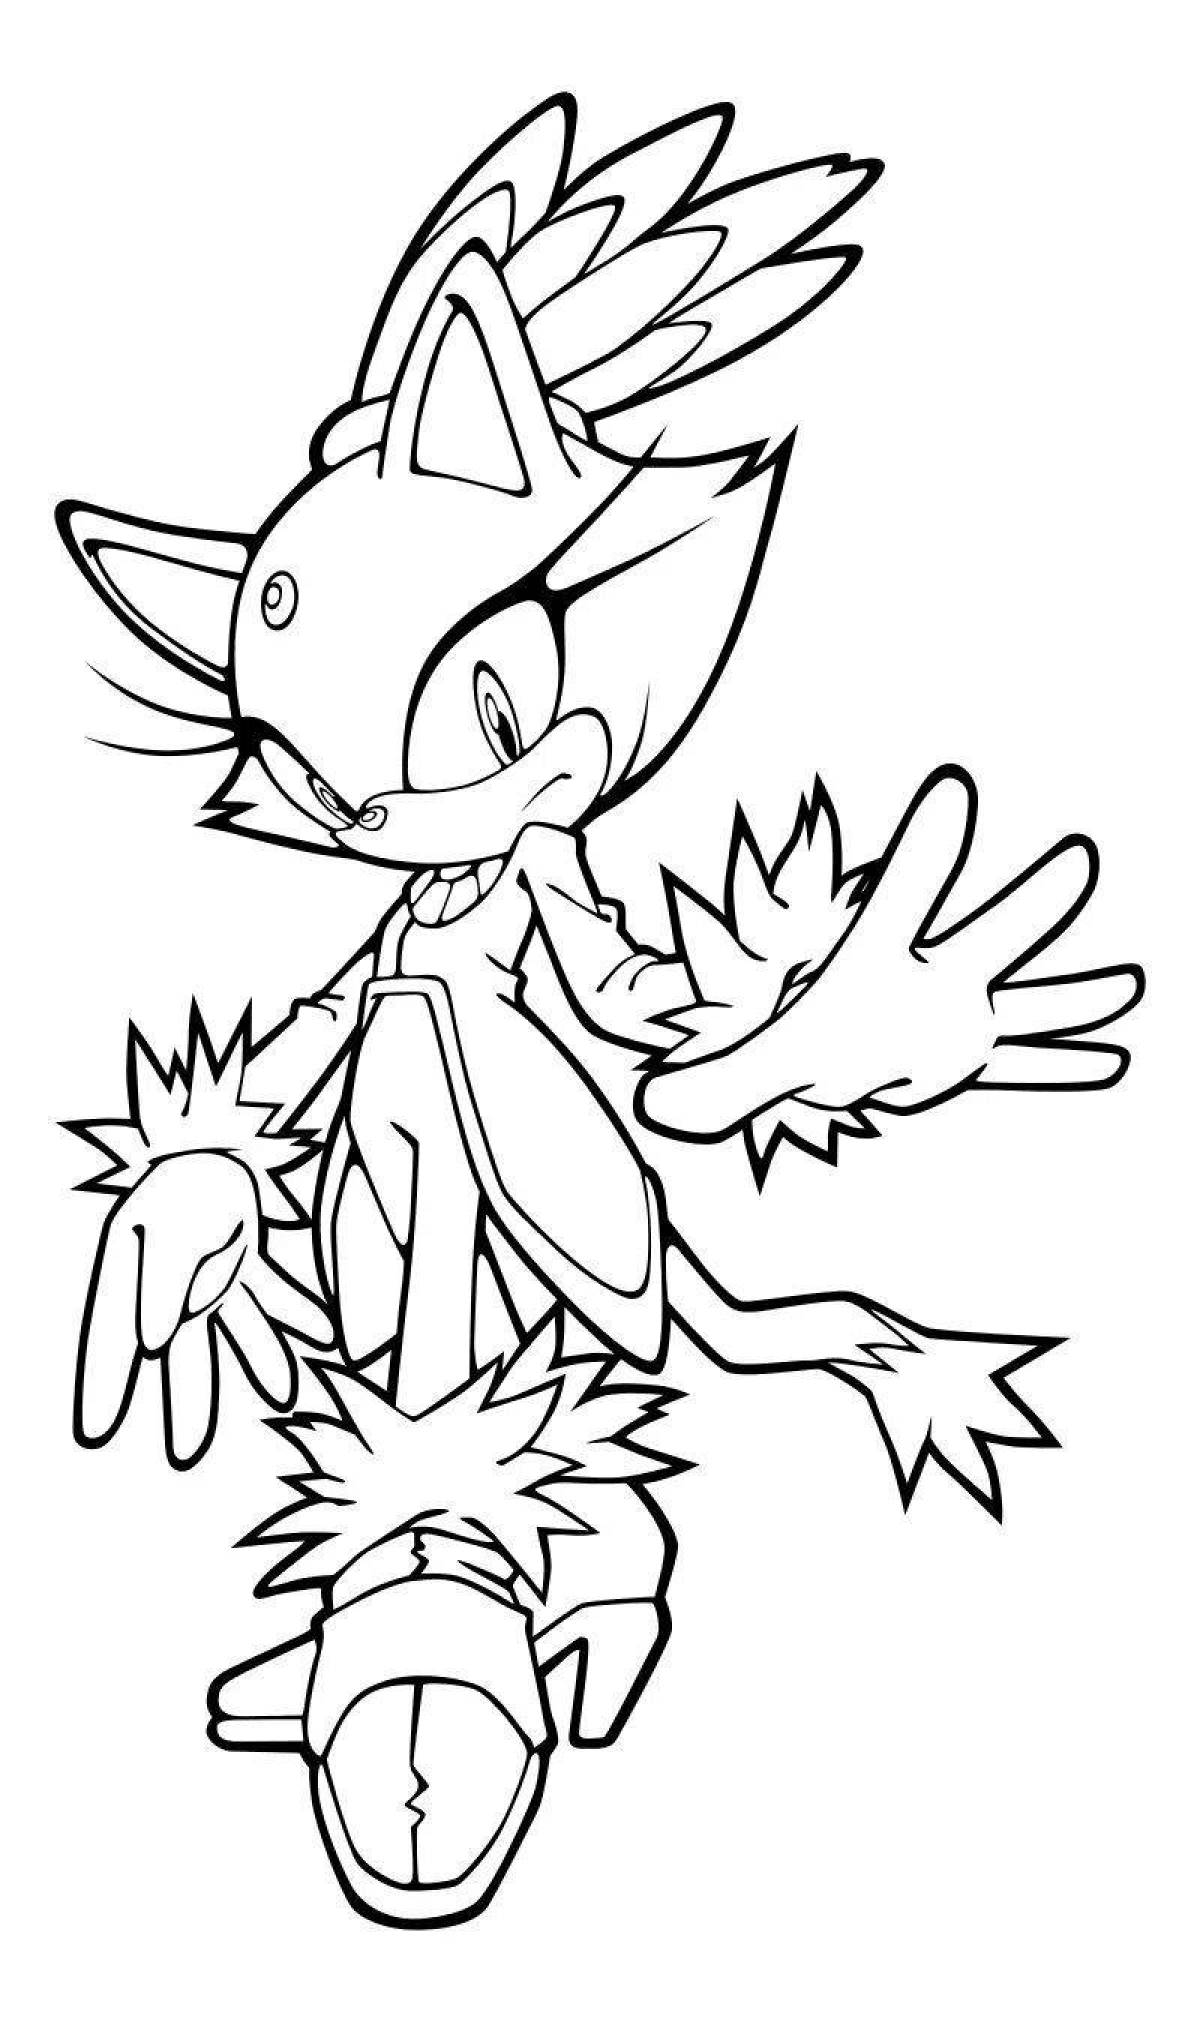 Excalibur sonic shiny coloring page